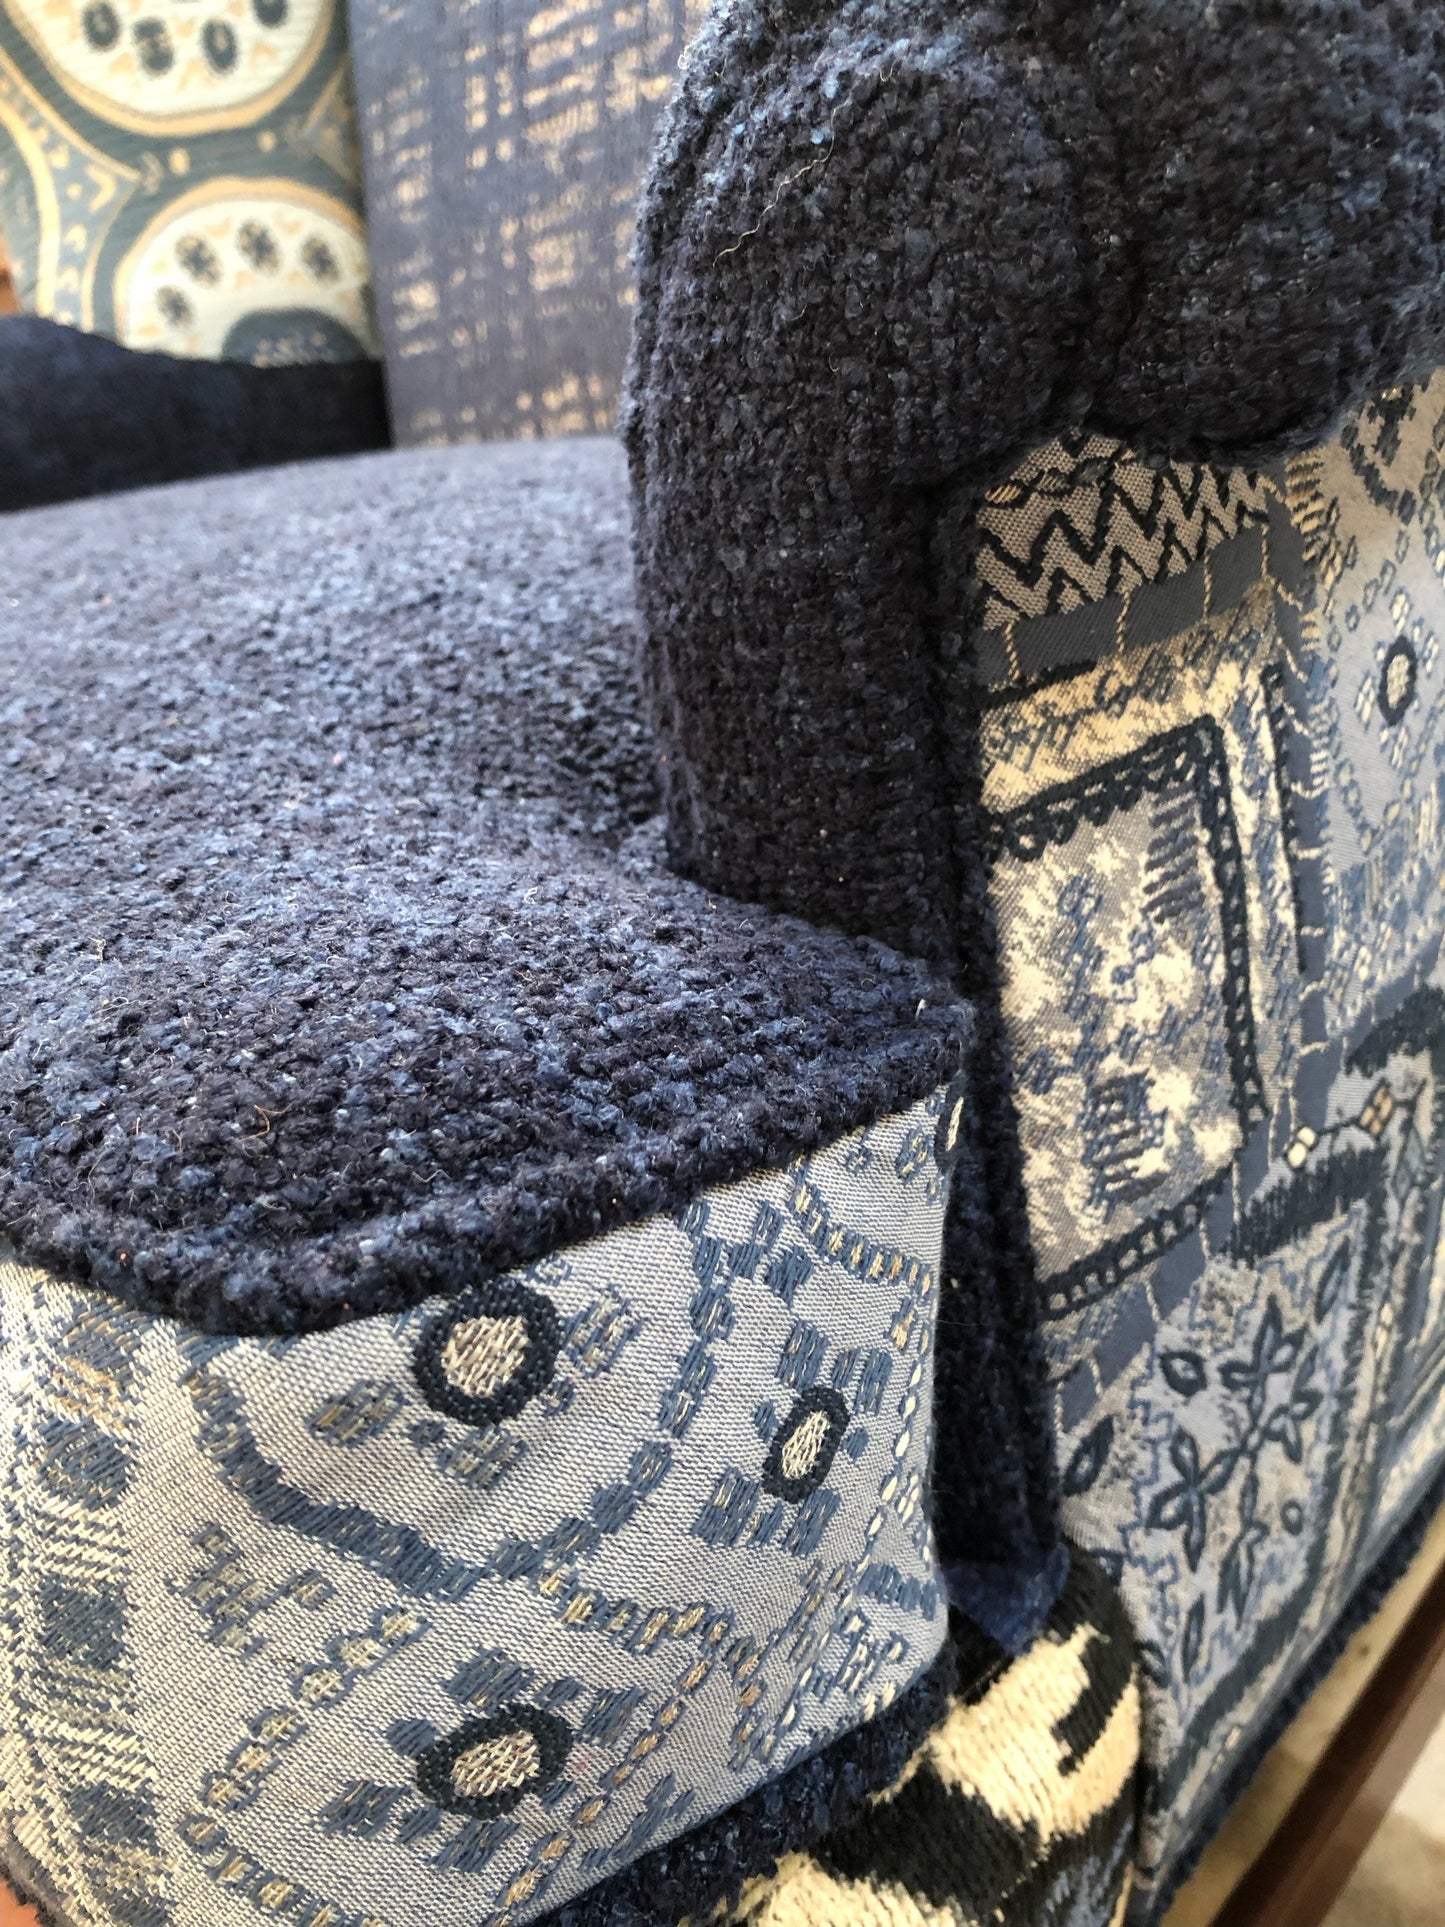 Recycled Reupholstered 1940s Loveseat in Shade of Blue